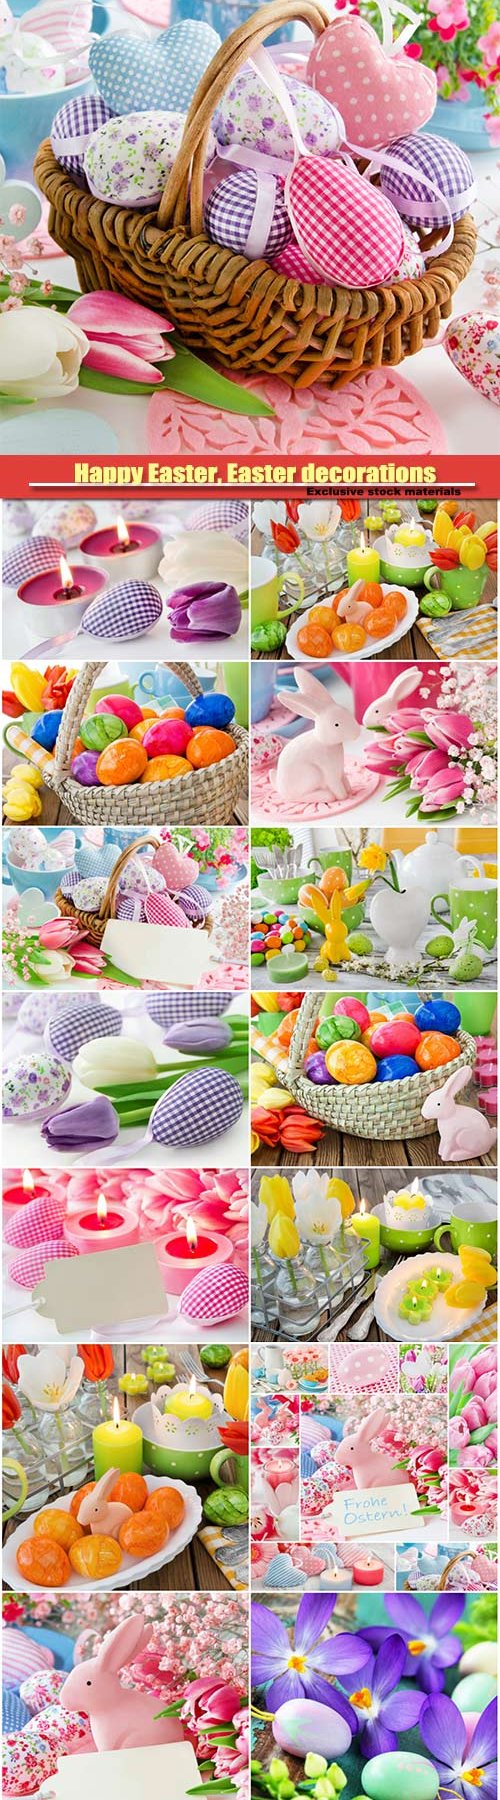 Happy Easter, Easter decorations, Easter eggs, Easter bunny